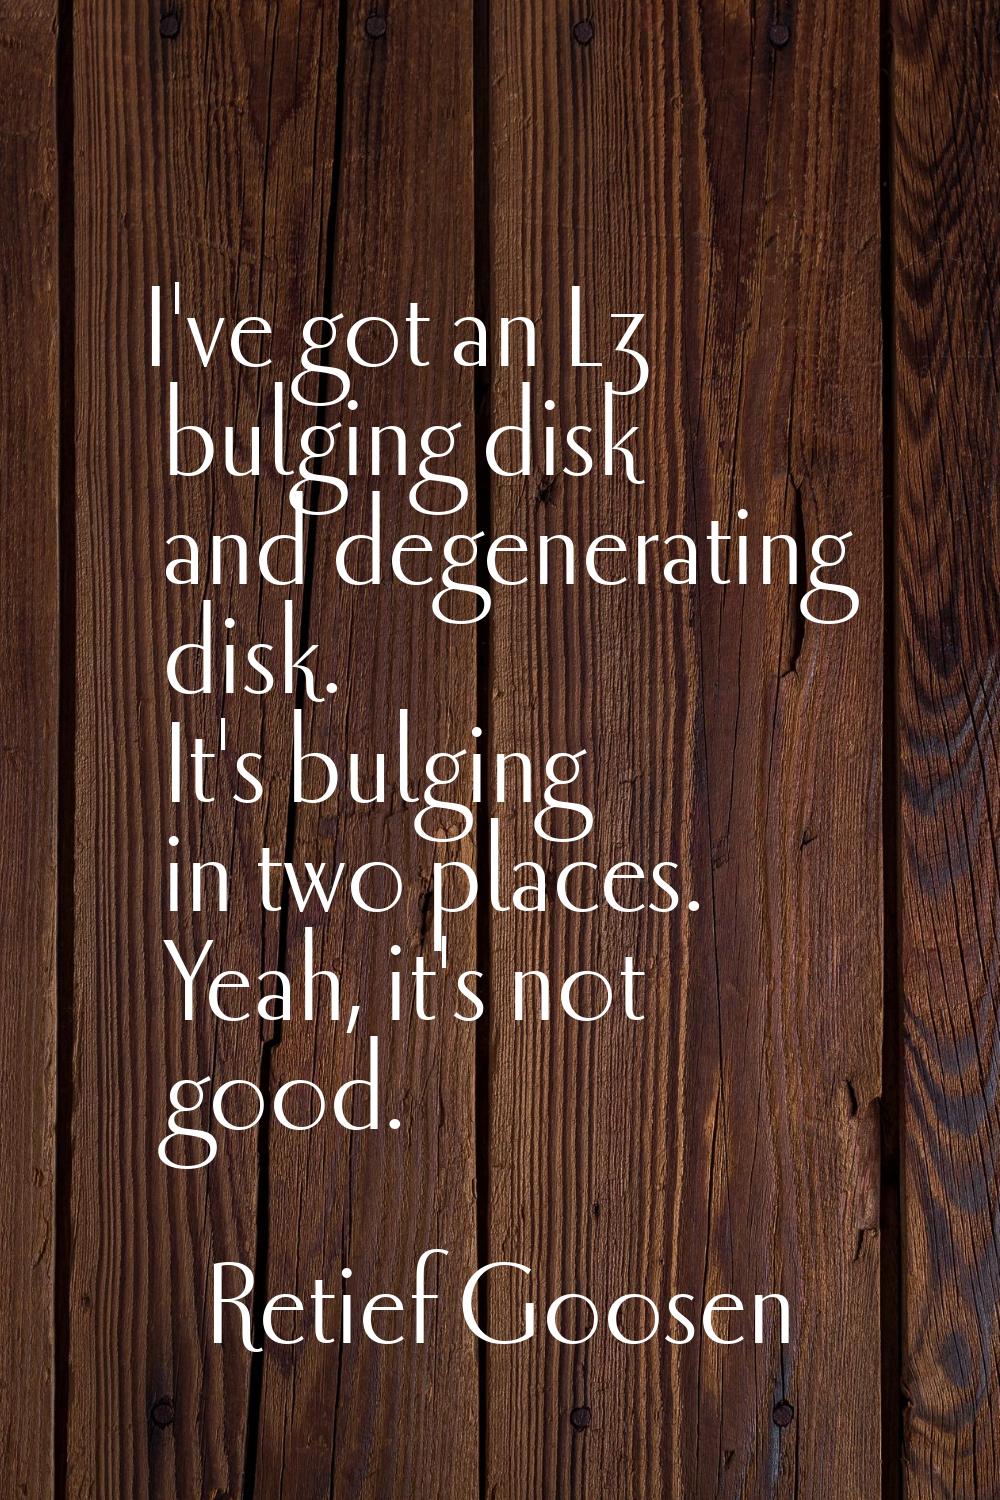 I've got an L3 bulging disk and degenerating disk. It's bulging in two places. Yeah, it's not good.